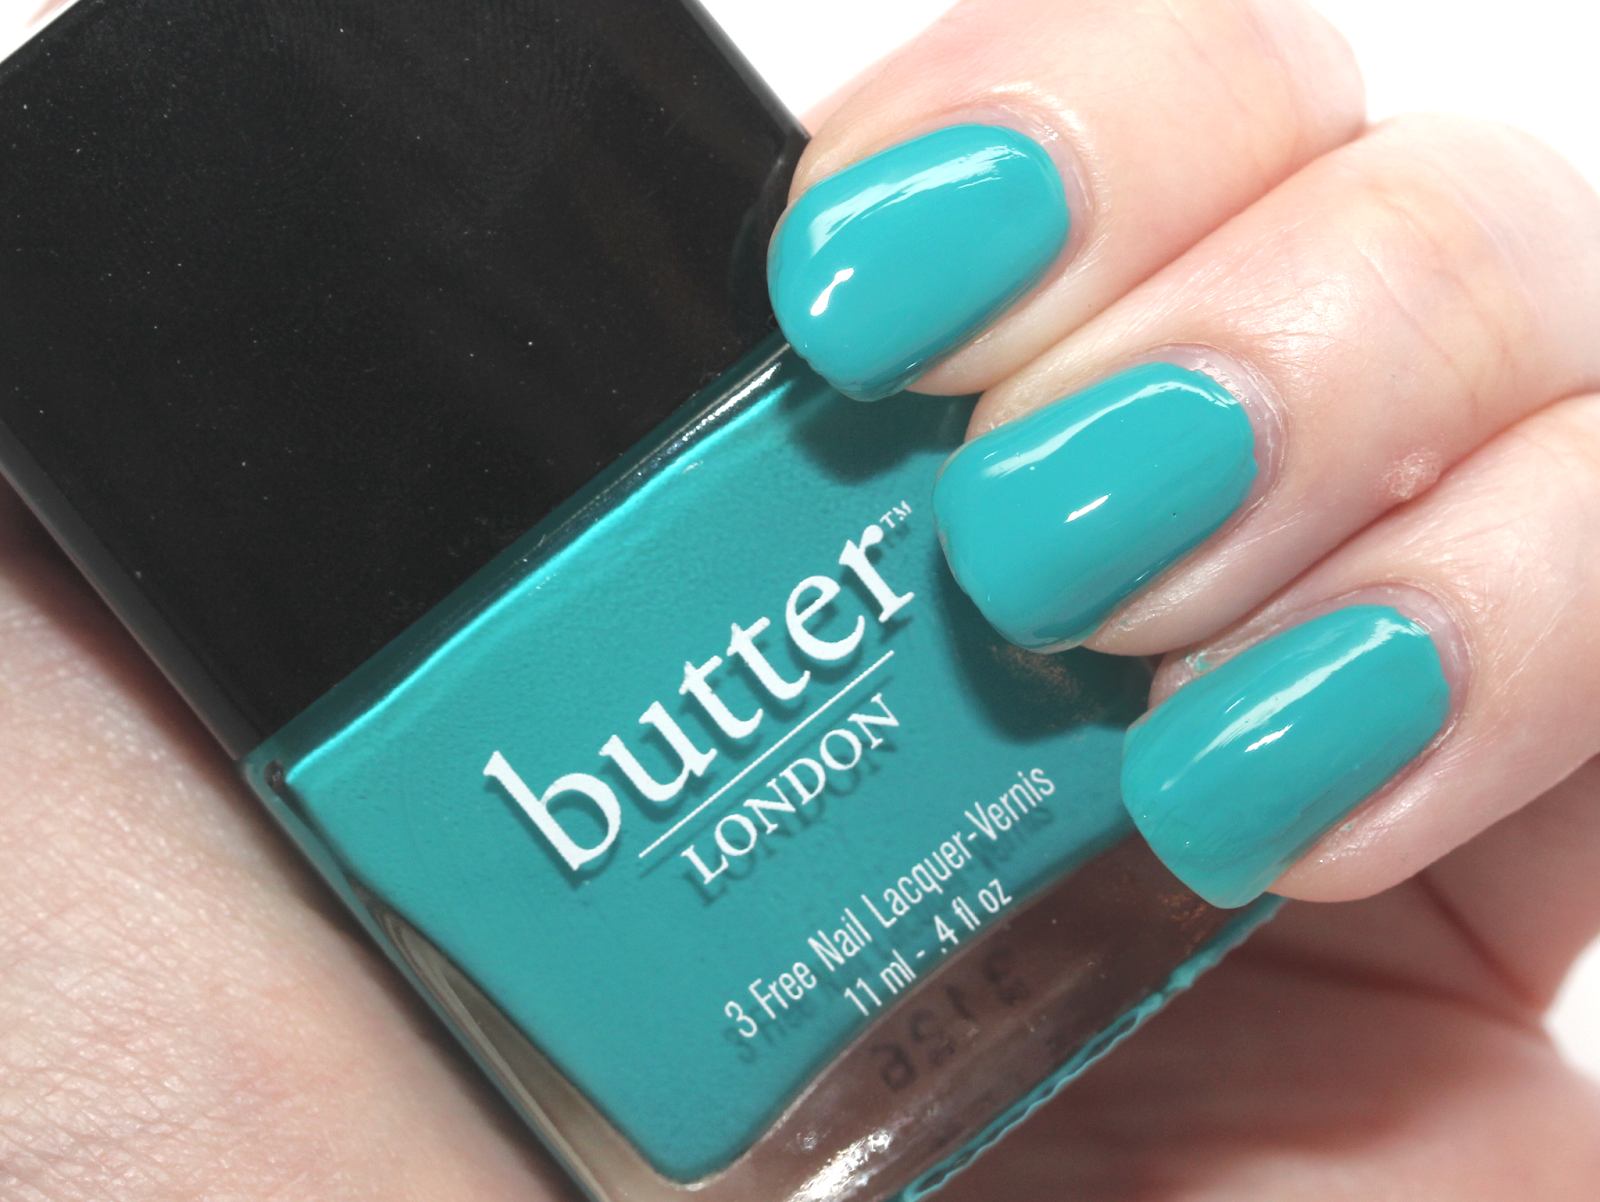 10. Butter London Nail Lacquer in "Come to Bed Red" - wide 11